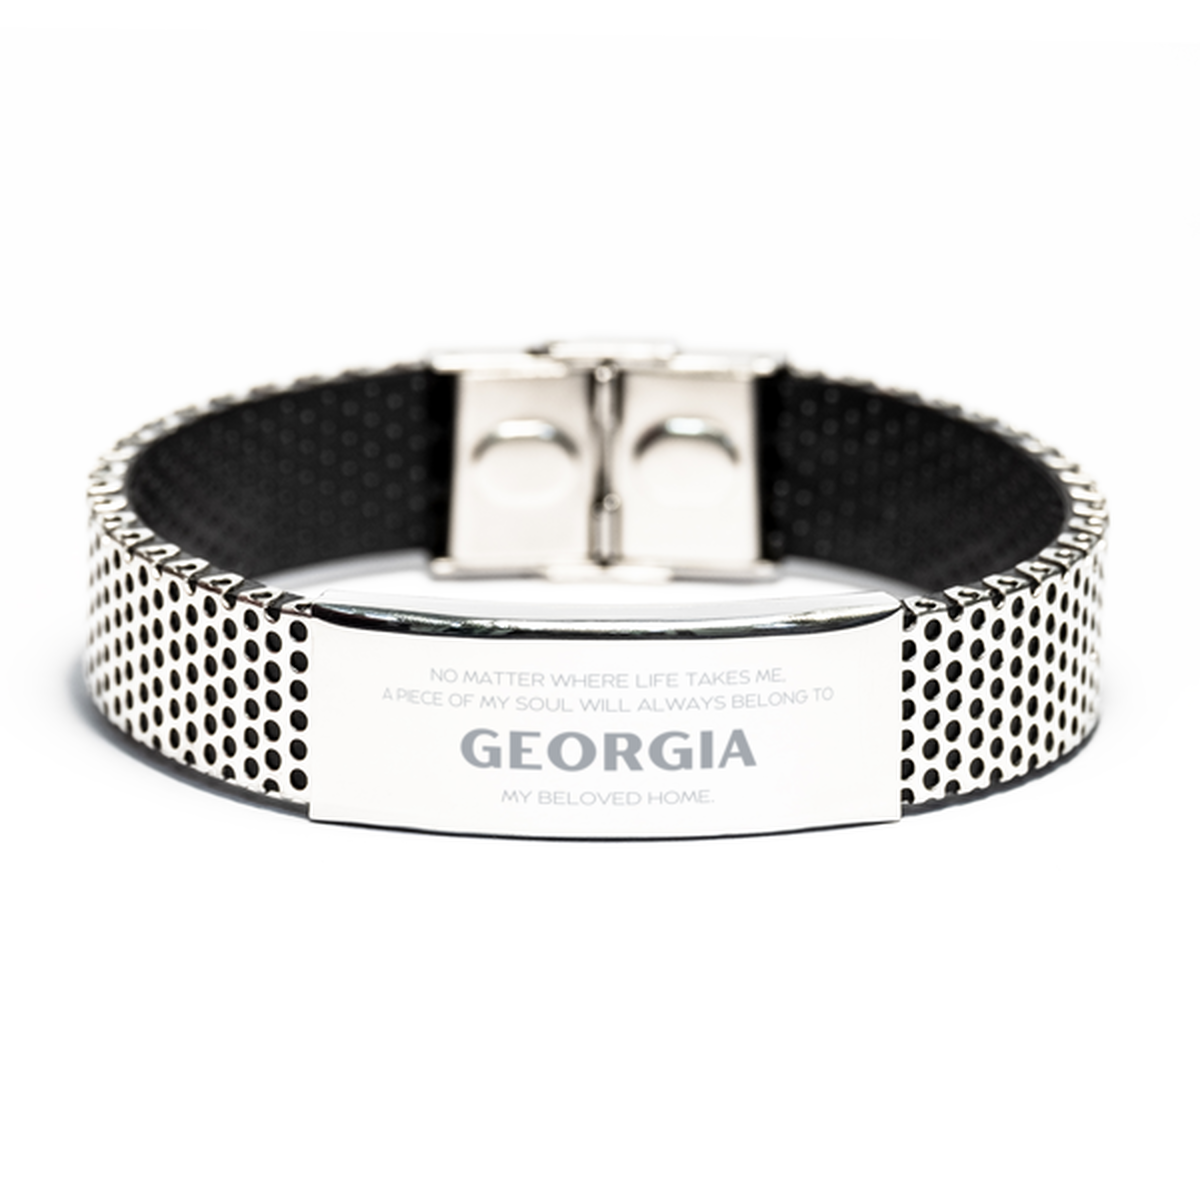 Love Georgia State Gifts, My soul will always belong to Georgia, Proud Stainless Steel Bracelet, Birthday Unique Gifts For Georgia Men, Women, Friends